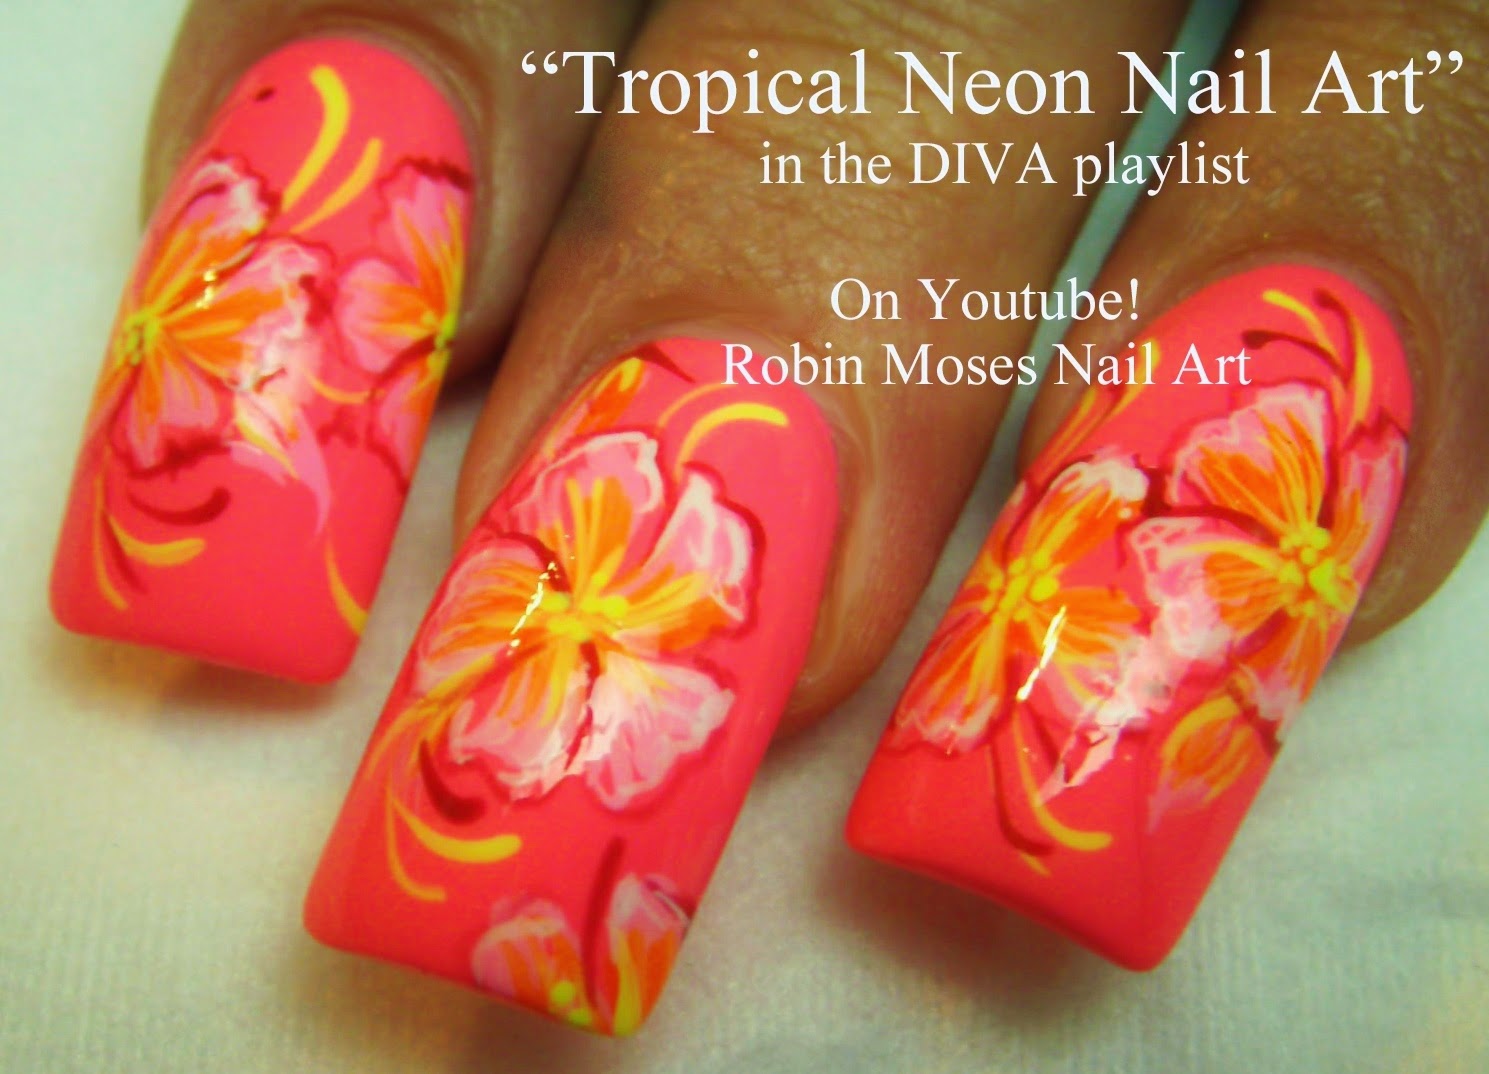 8. "Nail Art Videos and Tutorials" Facebook group - wide 6